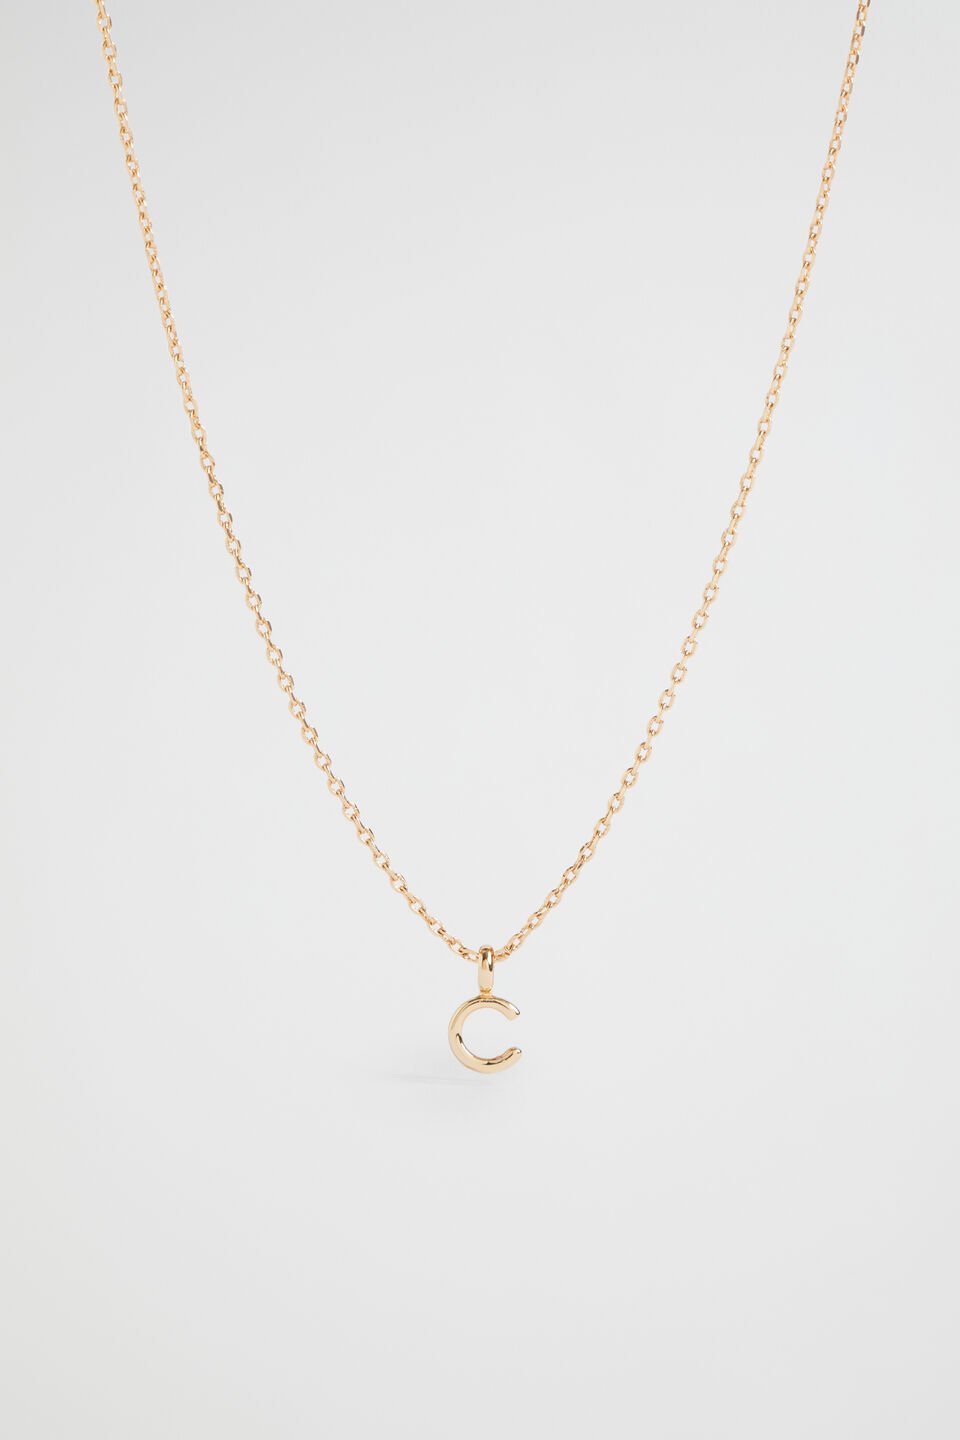 Gold Initial Necklace  C